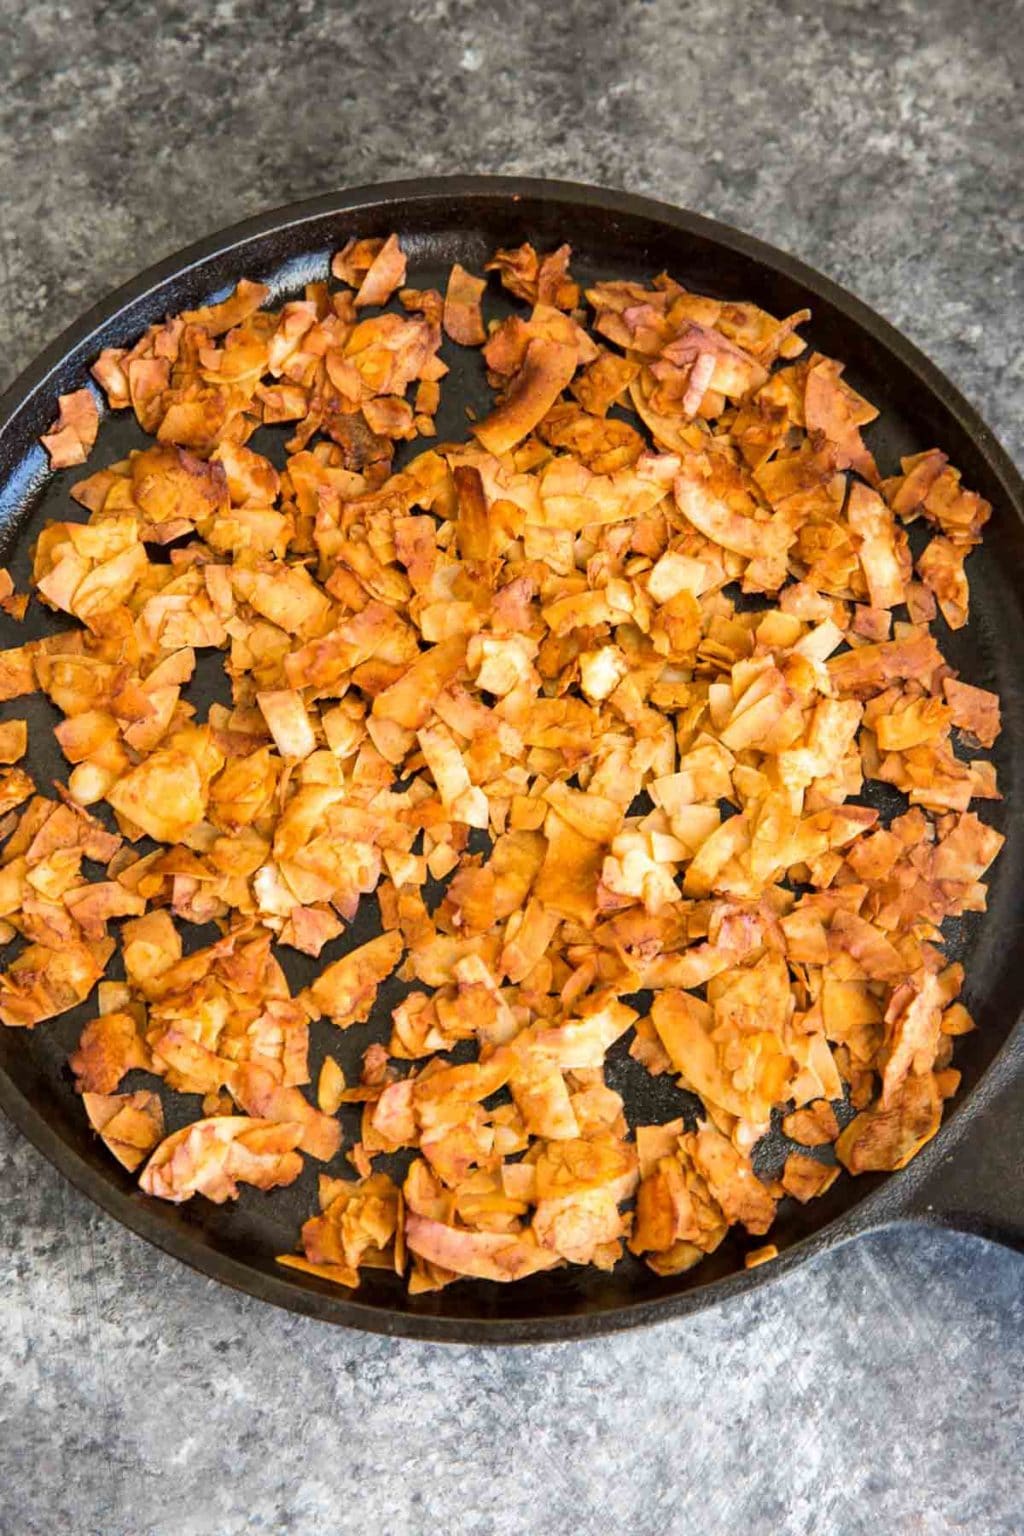 Coconut Chips baked into bacon on cast iron pan